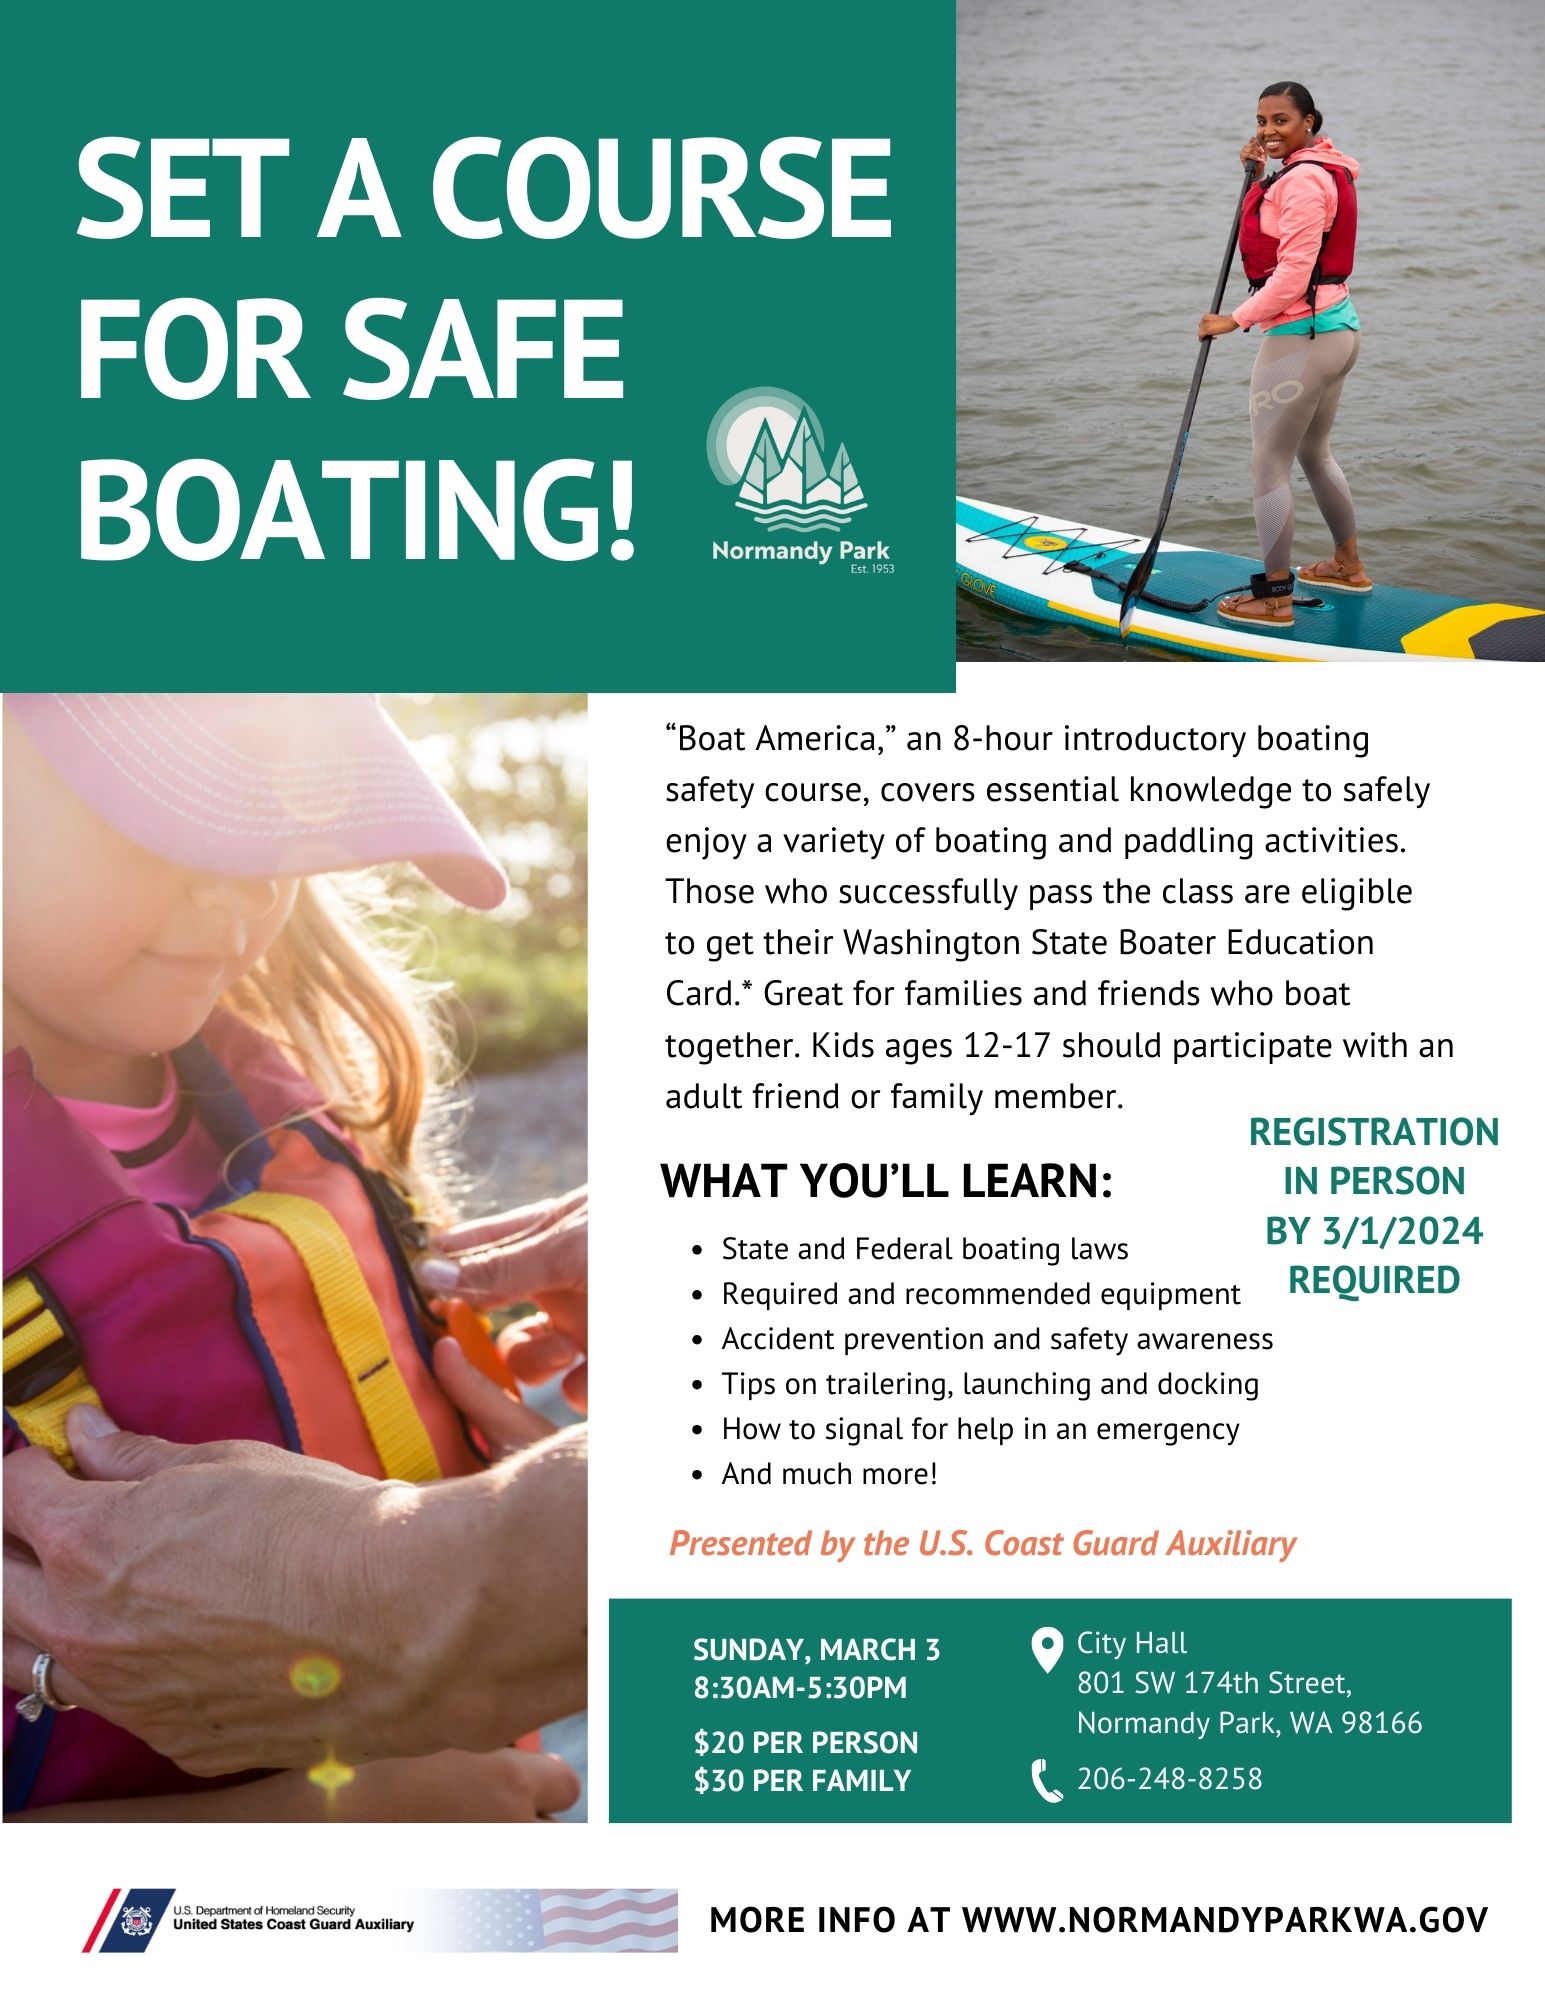 Boating Safety and Education for All